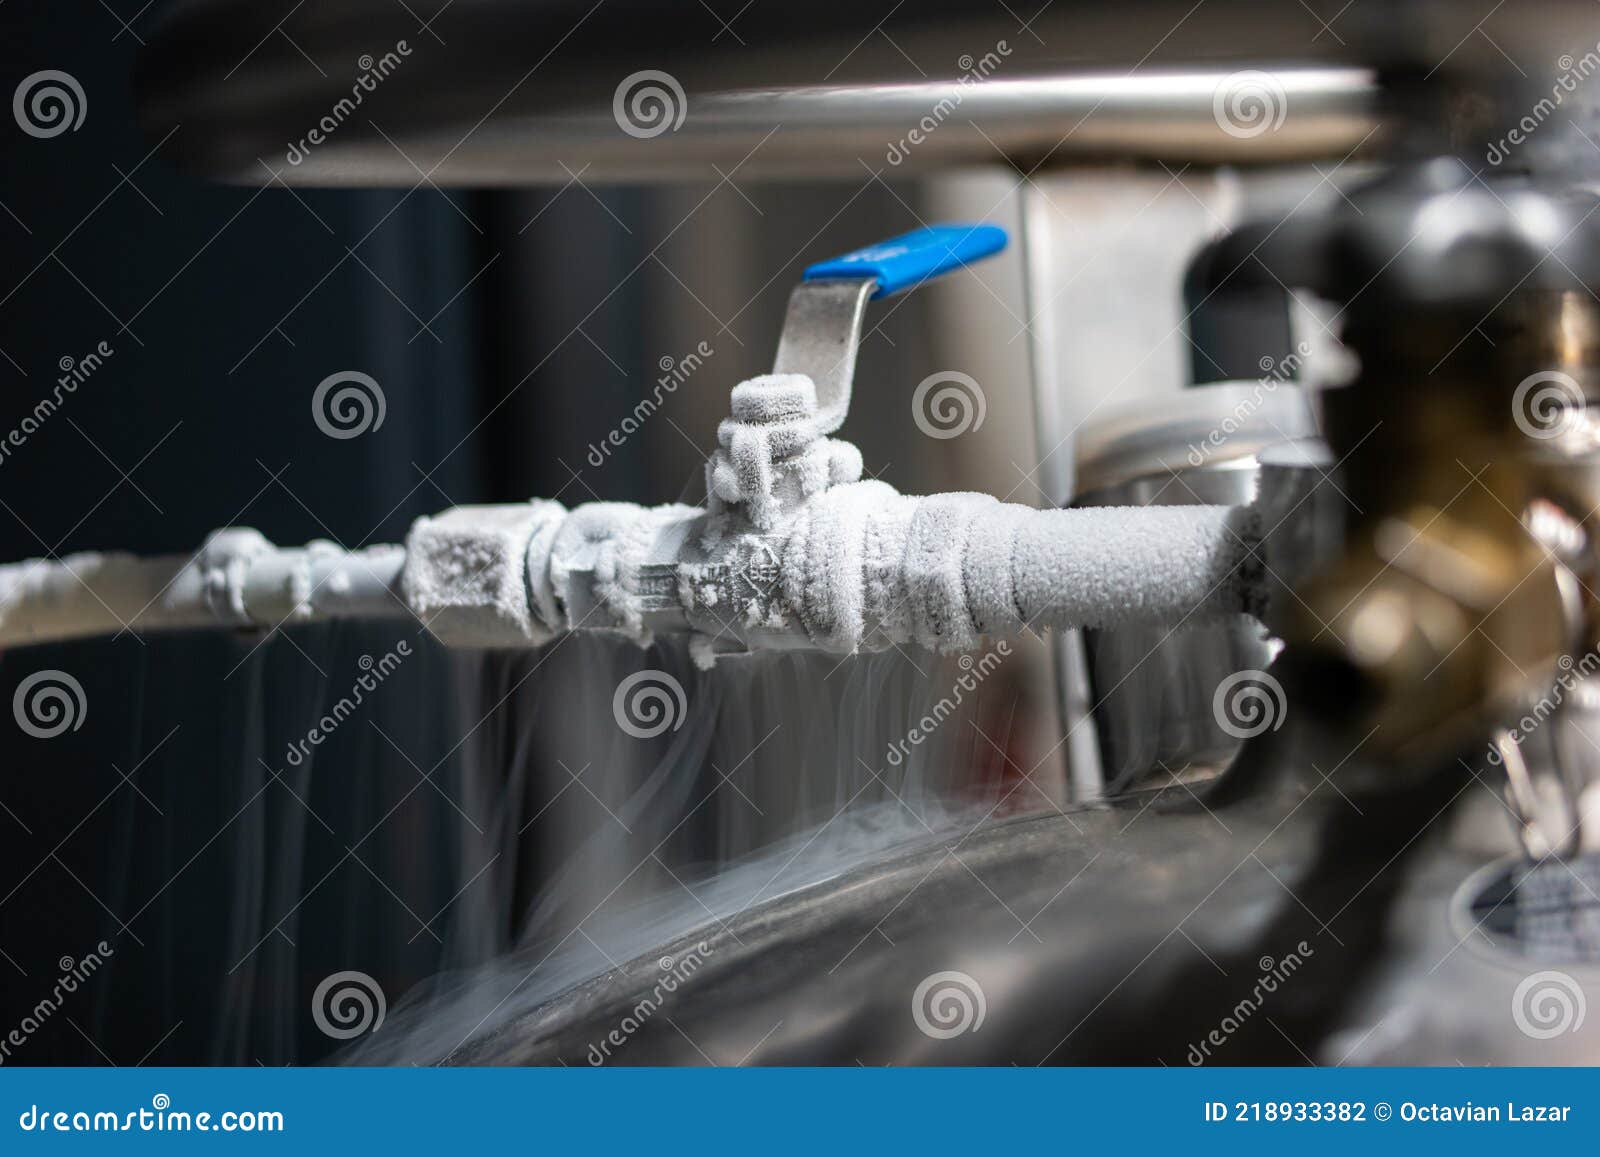 hånd rulletrappe plads Liquid Nitrogen Frozen Faucet and Lever. Visible Floating White  Condensation Smoke from Pressurized Tank Close Up Shot Stock Photo - Image  of cylinder, laboratory: 218933382